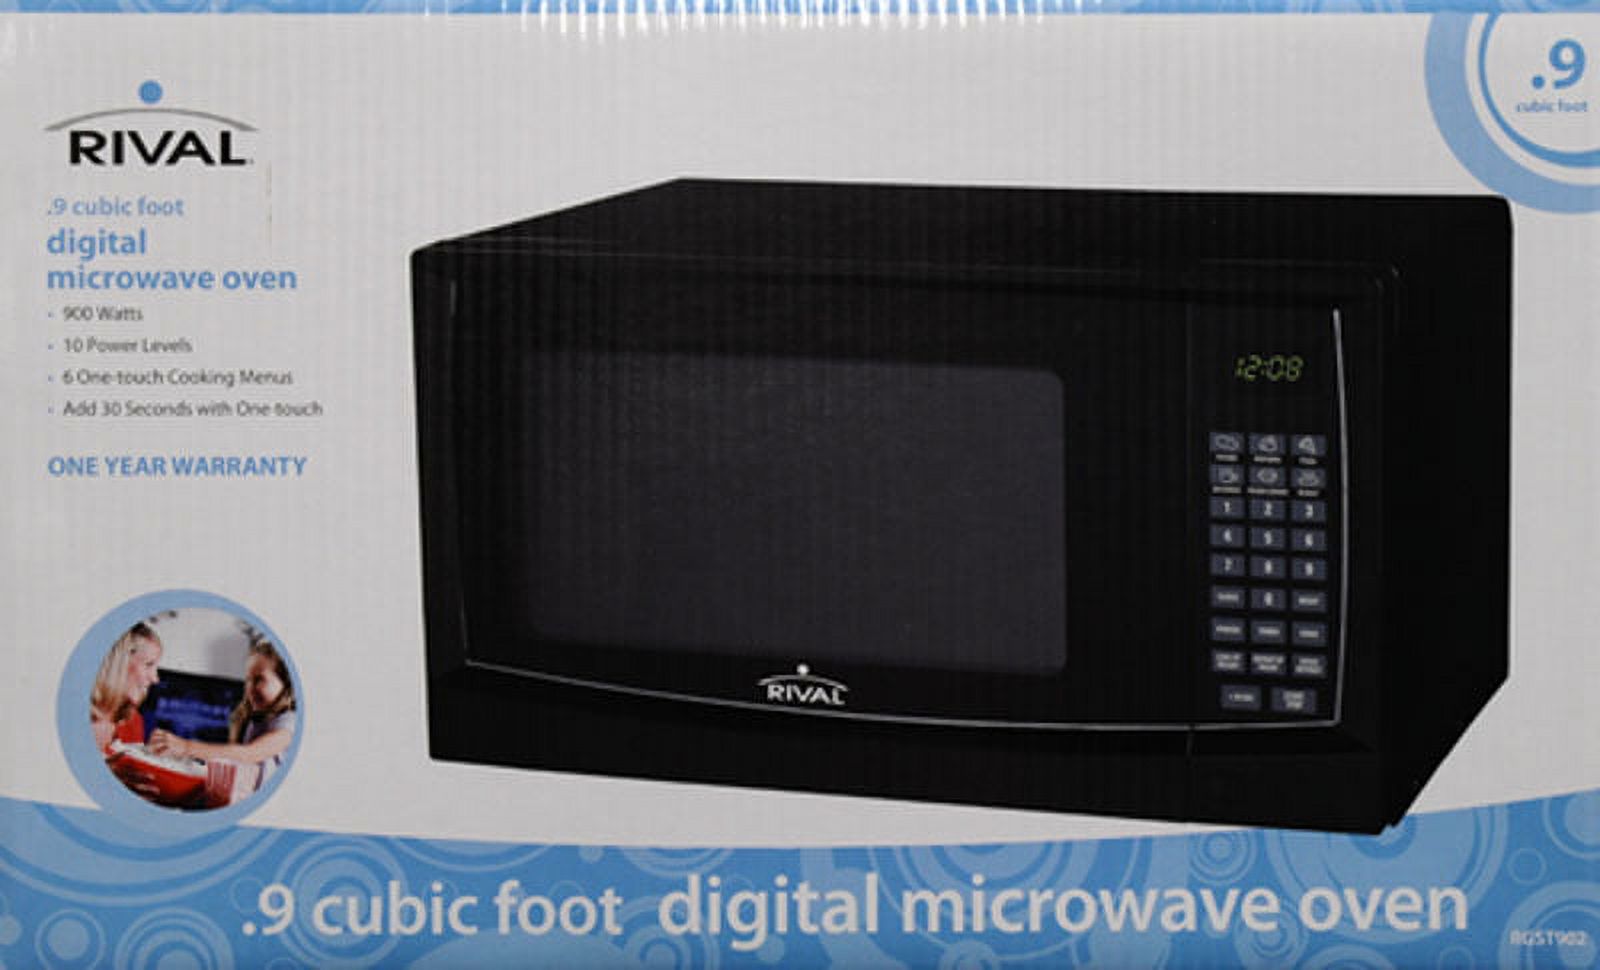 Rival 0.9 Cu. Ft. Black Microwave Oven - image 4 of 6